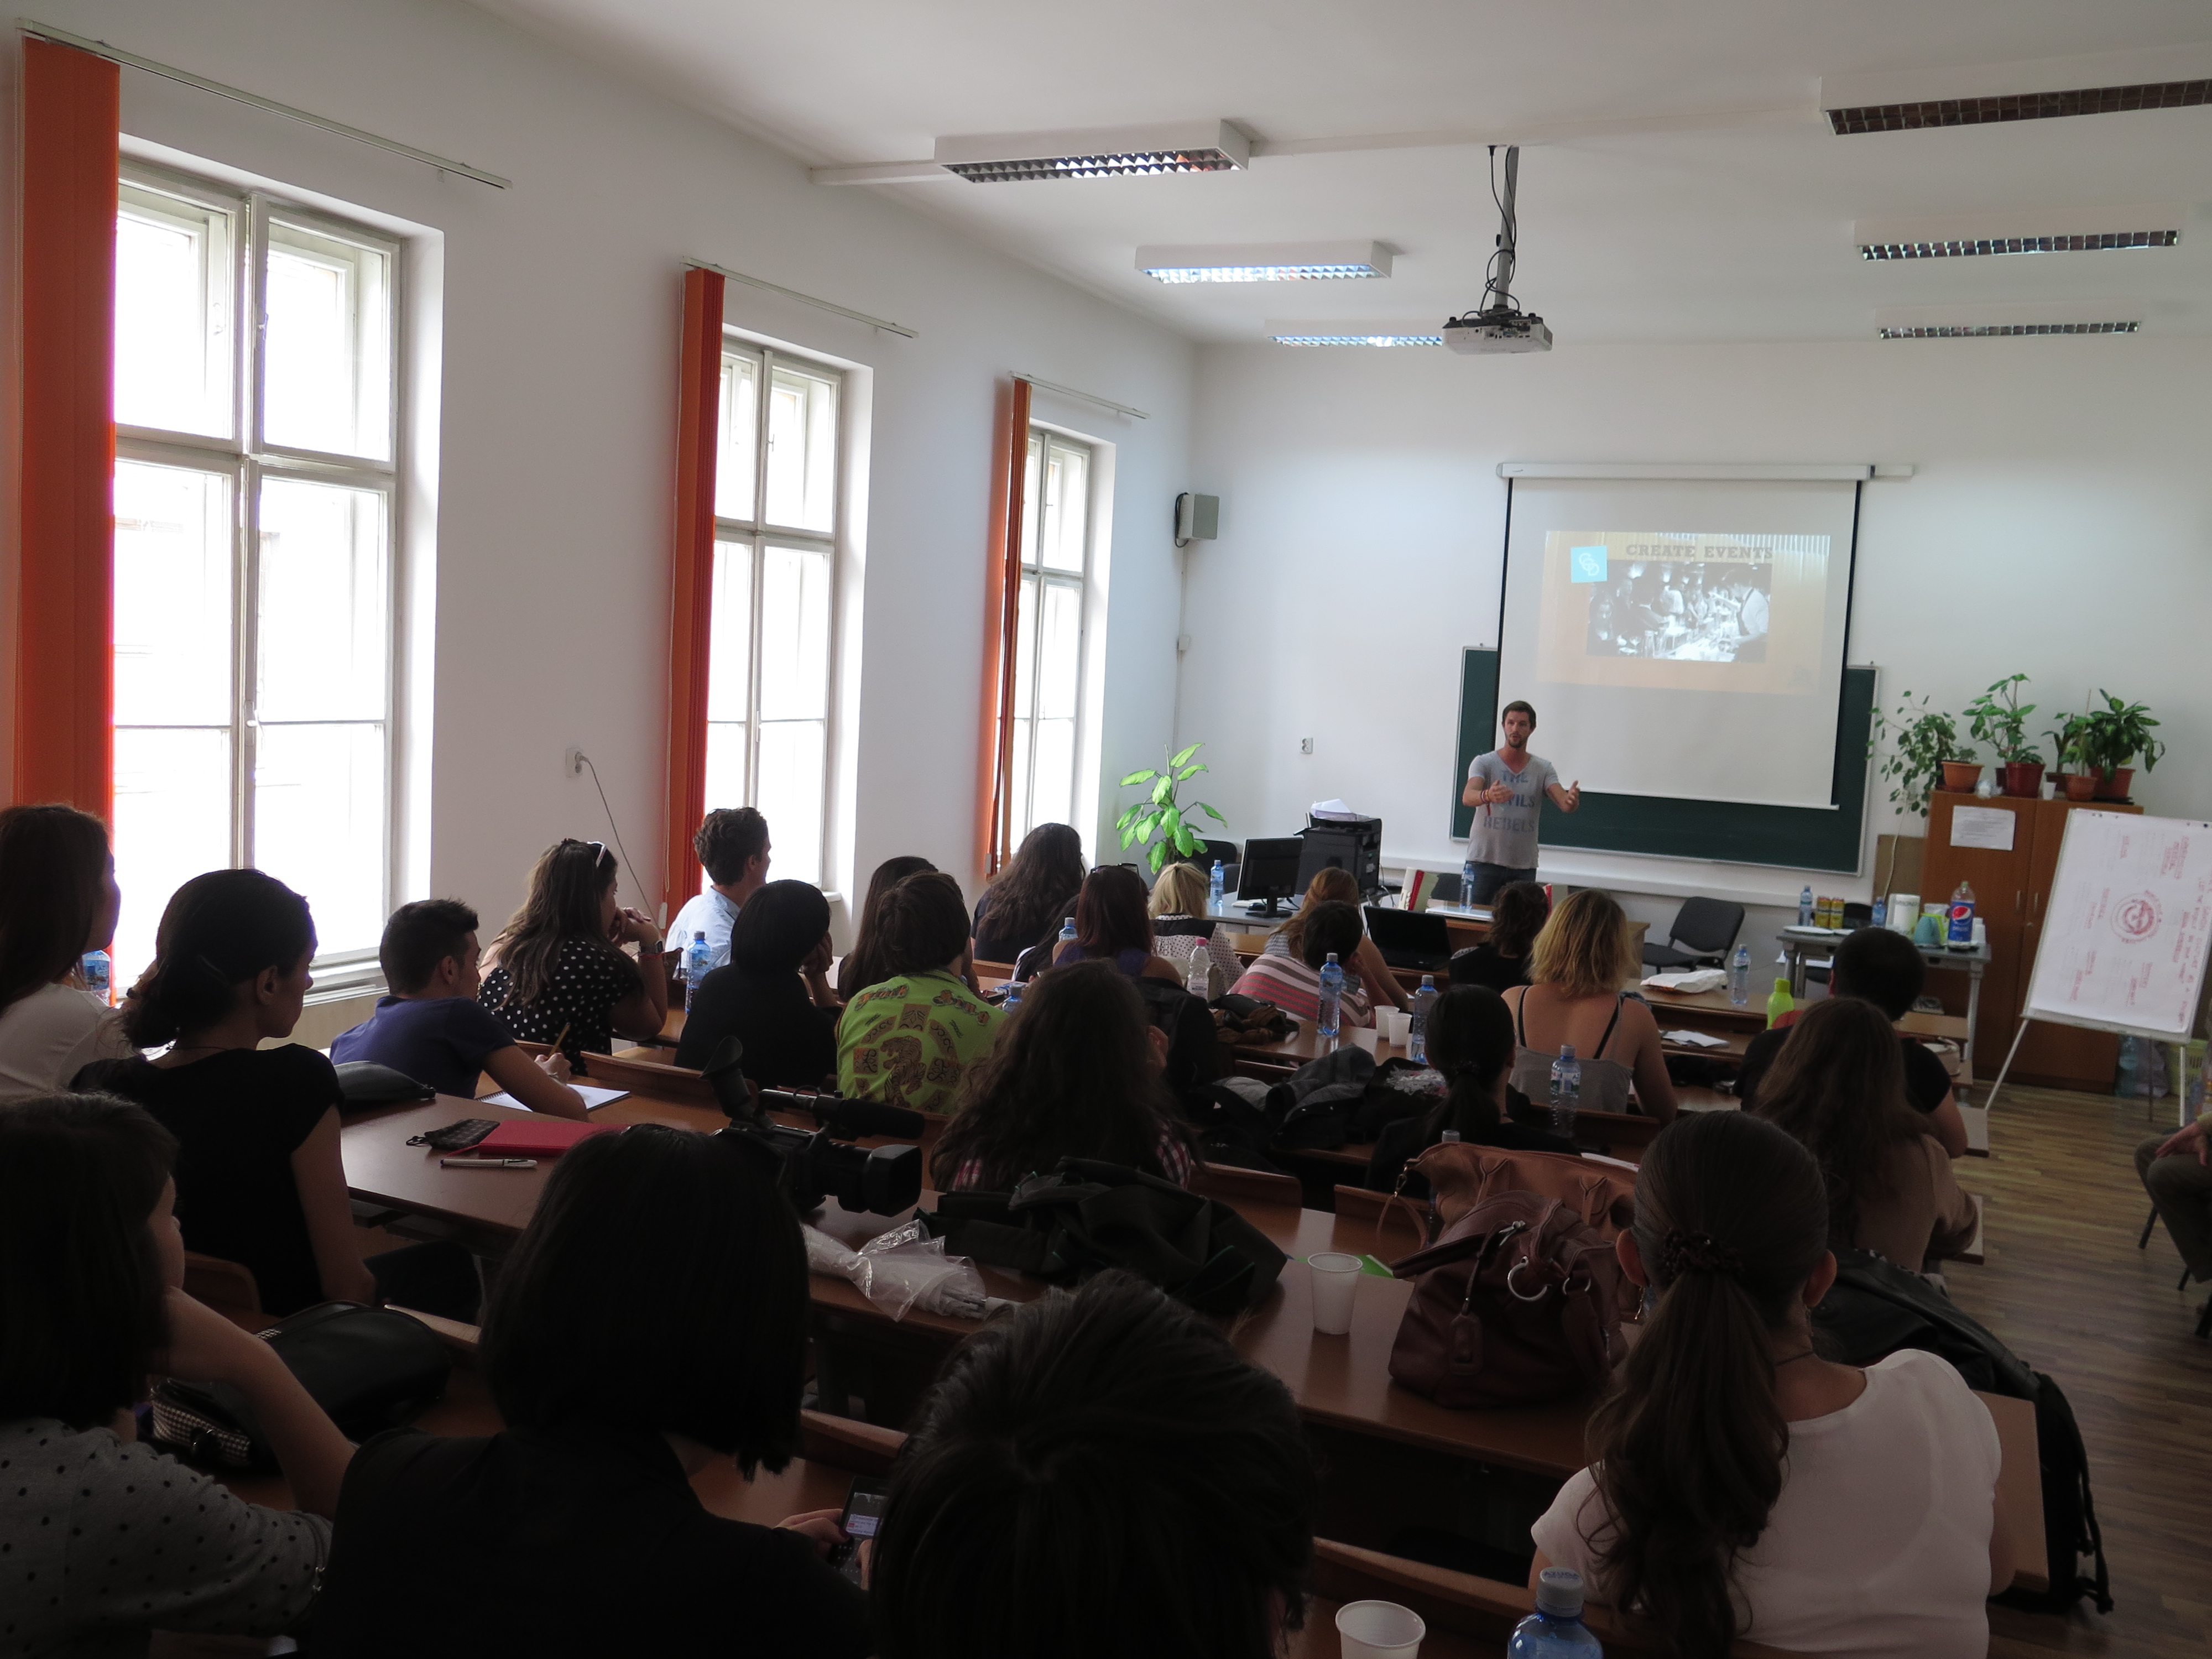 The Backpacker Intern giving a presentation at the University of Transylvania